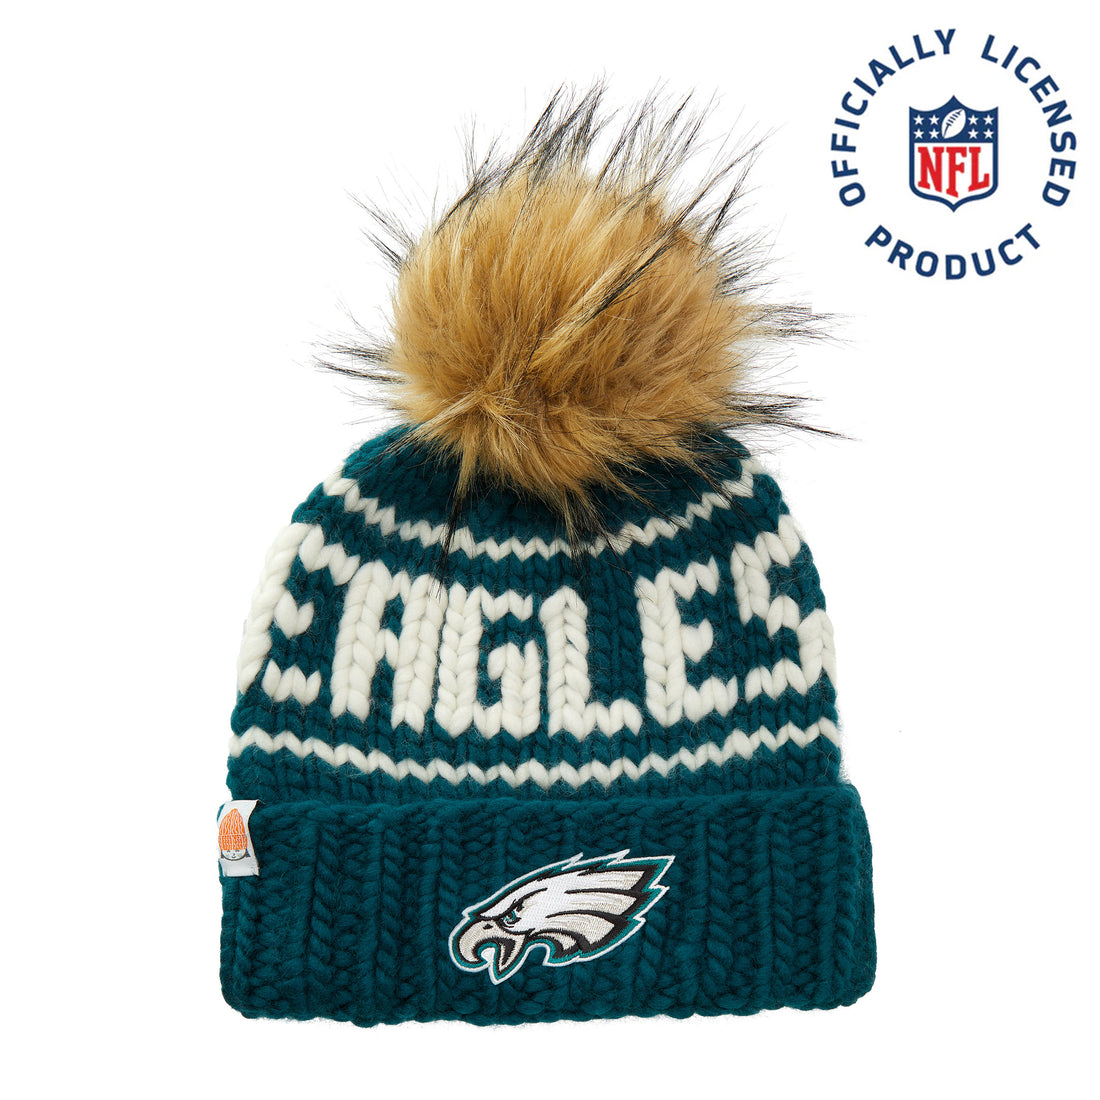 The Eagles NFL Beanie with Faux Fur Pom